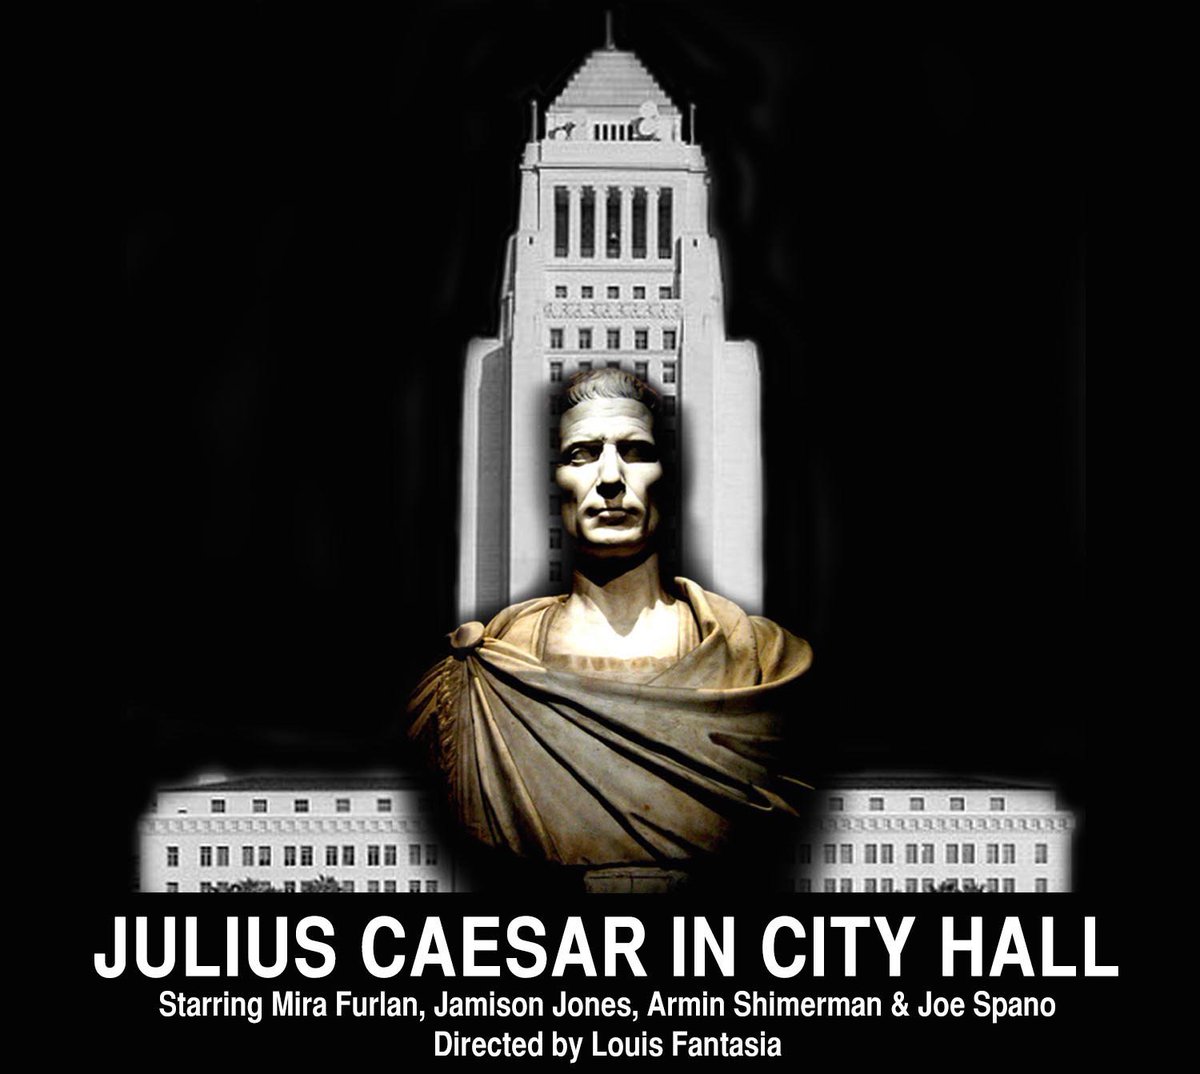 Best wishes to @shakescenterLA @ShimermanArmin (from ep 2, playing #JuliusCaesar) and the entire rest of the cast and crew on a sold out reading this weekend!

#wajpodcast #workingactor #idesofmarch #lacityhall #stagedreading #actingcareer #laactor #losangelestheatre #soldout